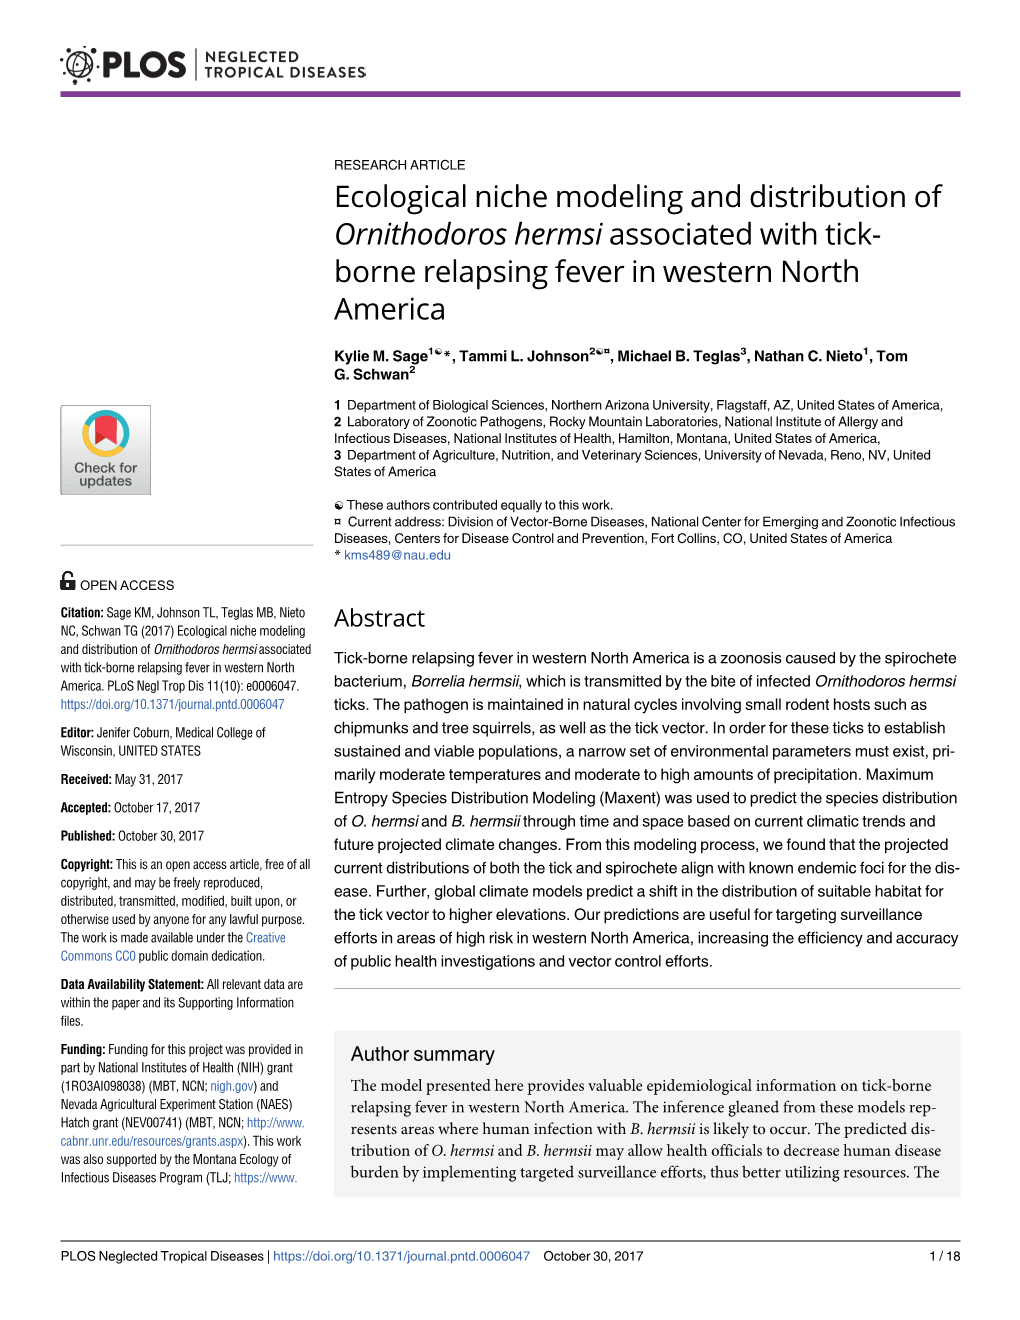 Ecological Niche Modeling and Distribution of Ornithodoros Hermsi Associated with Tick- Borne Relapsing Fever in Western North America